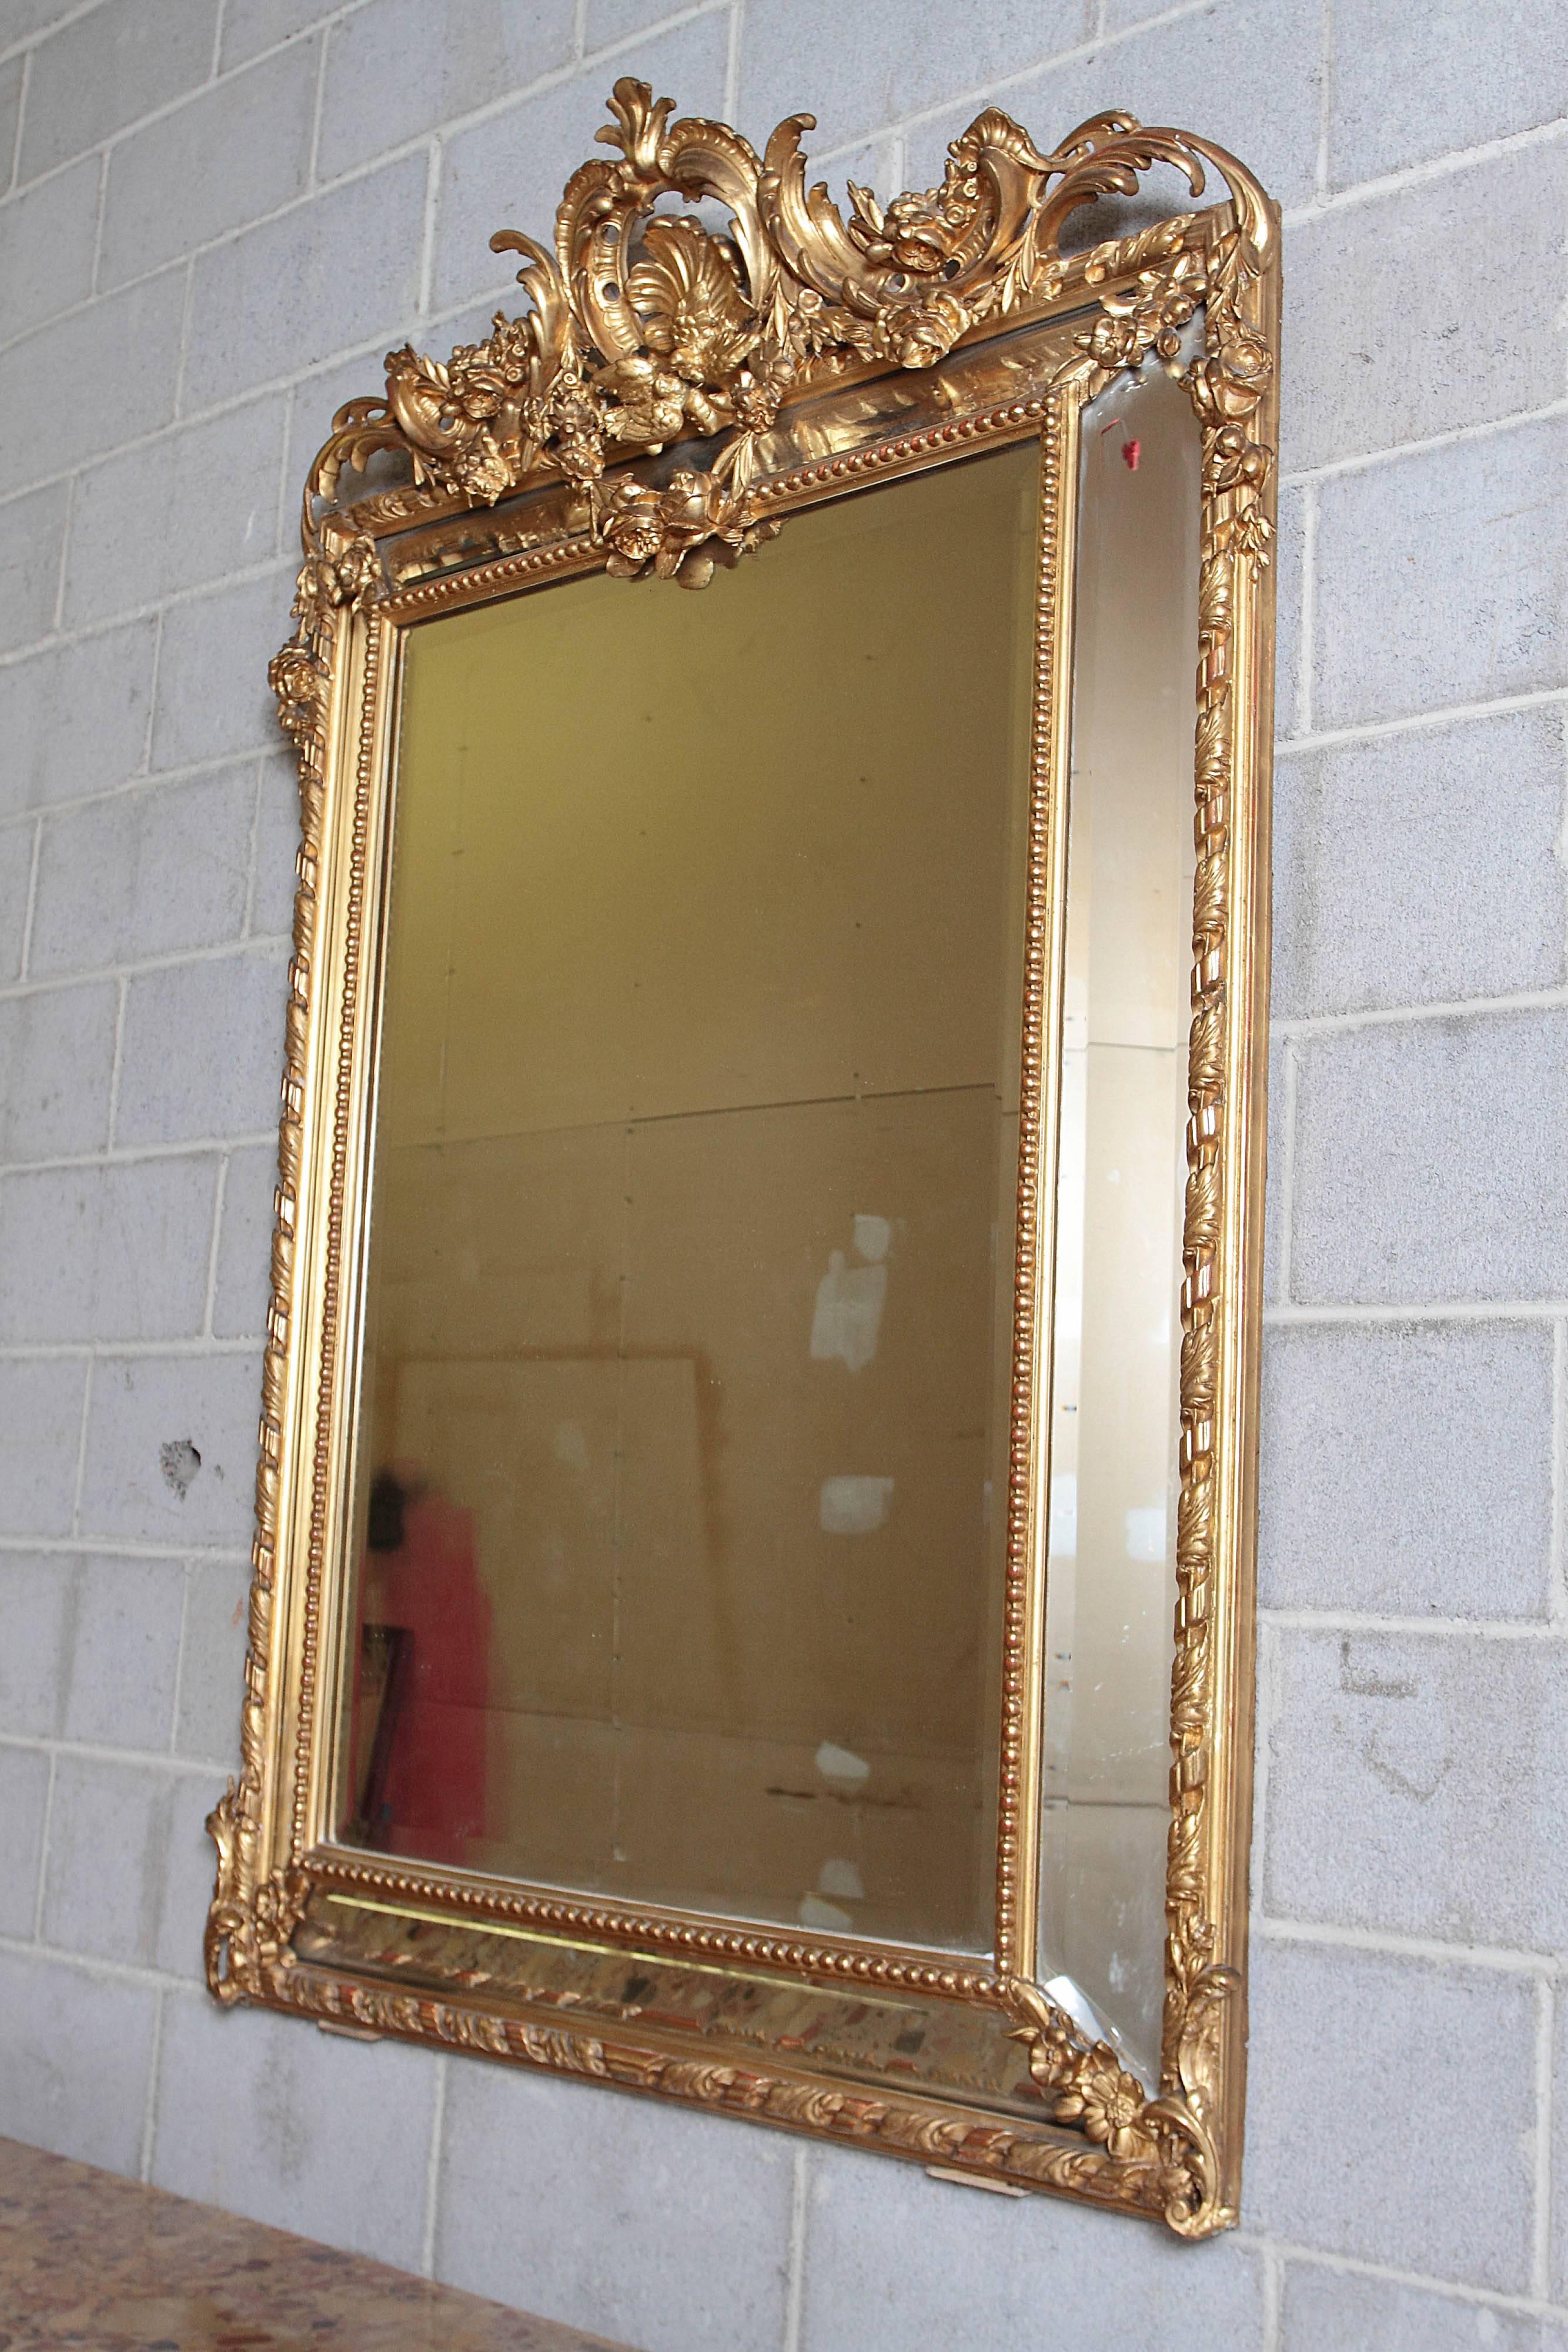 19th century French Louis XV gilt carved mirror. Fine detail with shell design at the top and doves kissing.